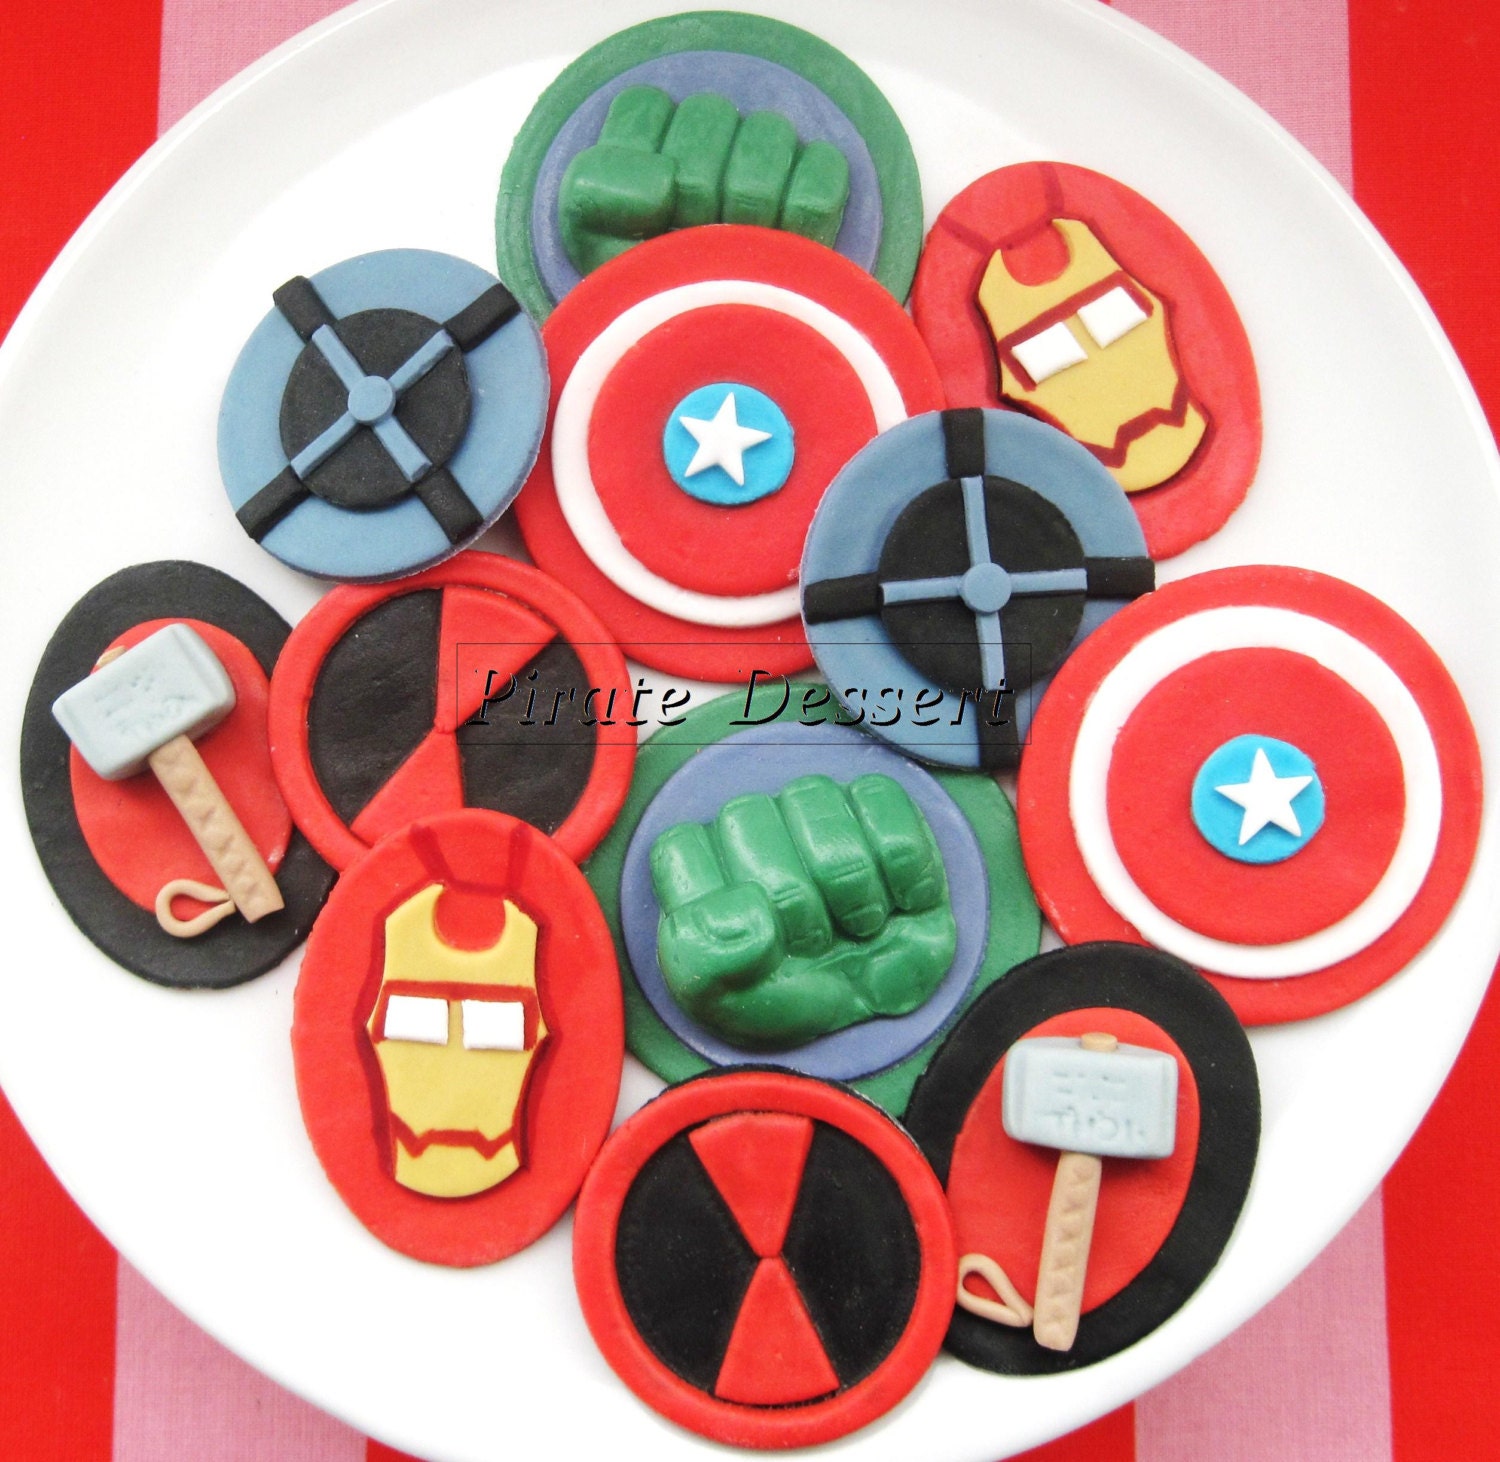 The AVENGERS Edible SUPERHERO Cupcake Toppers By PirateDessert